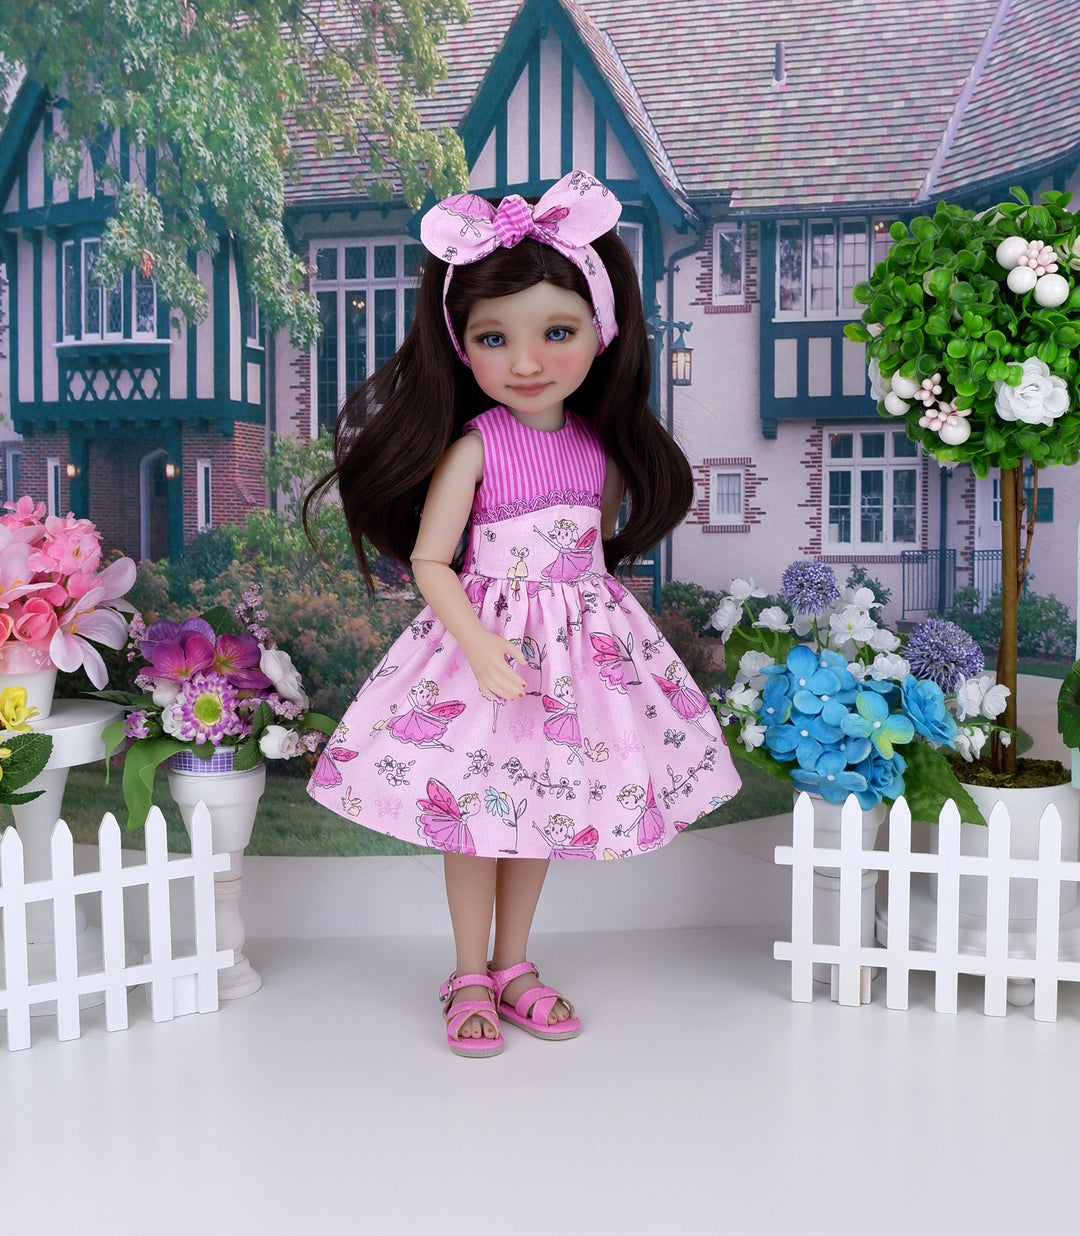 Lil' Forest Fairy - dress and sandals for Ruby Red Fashion Friends doll